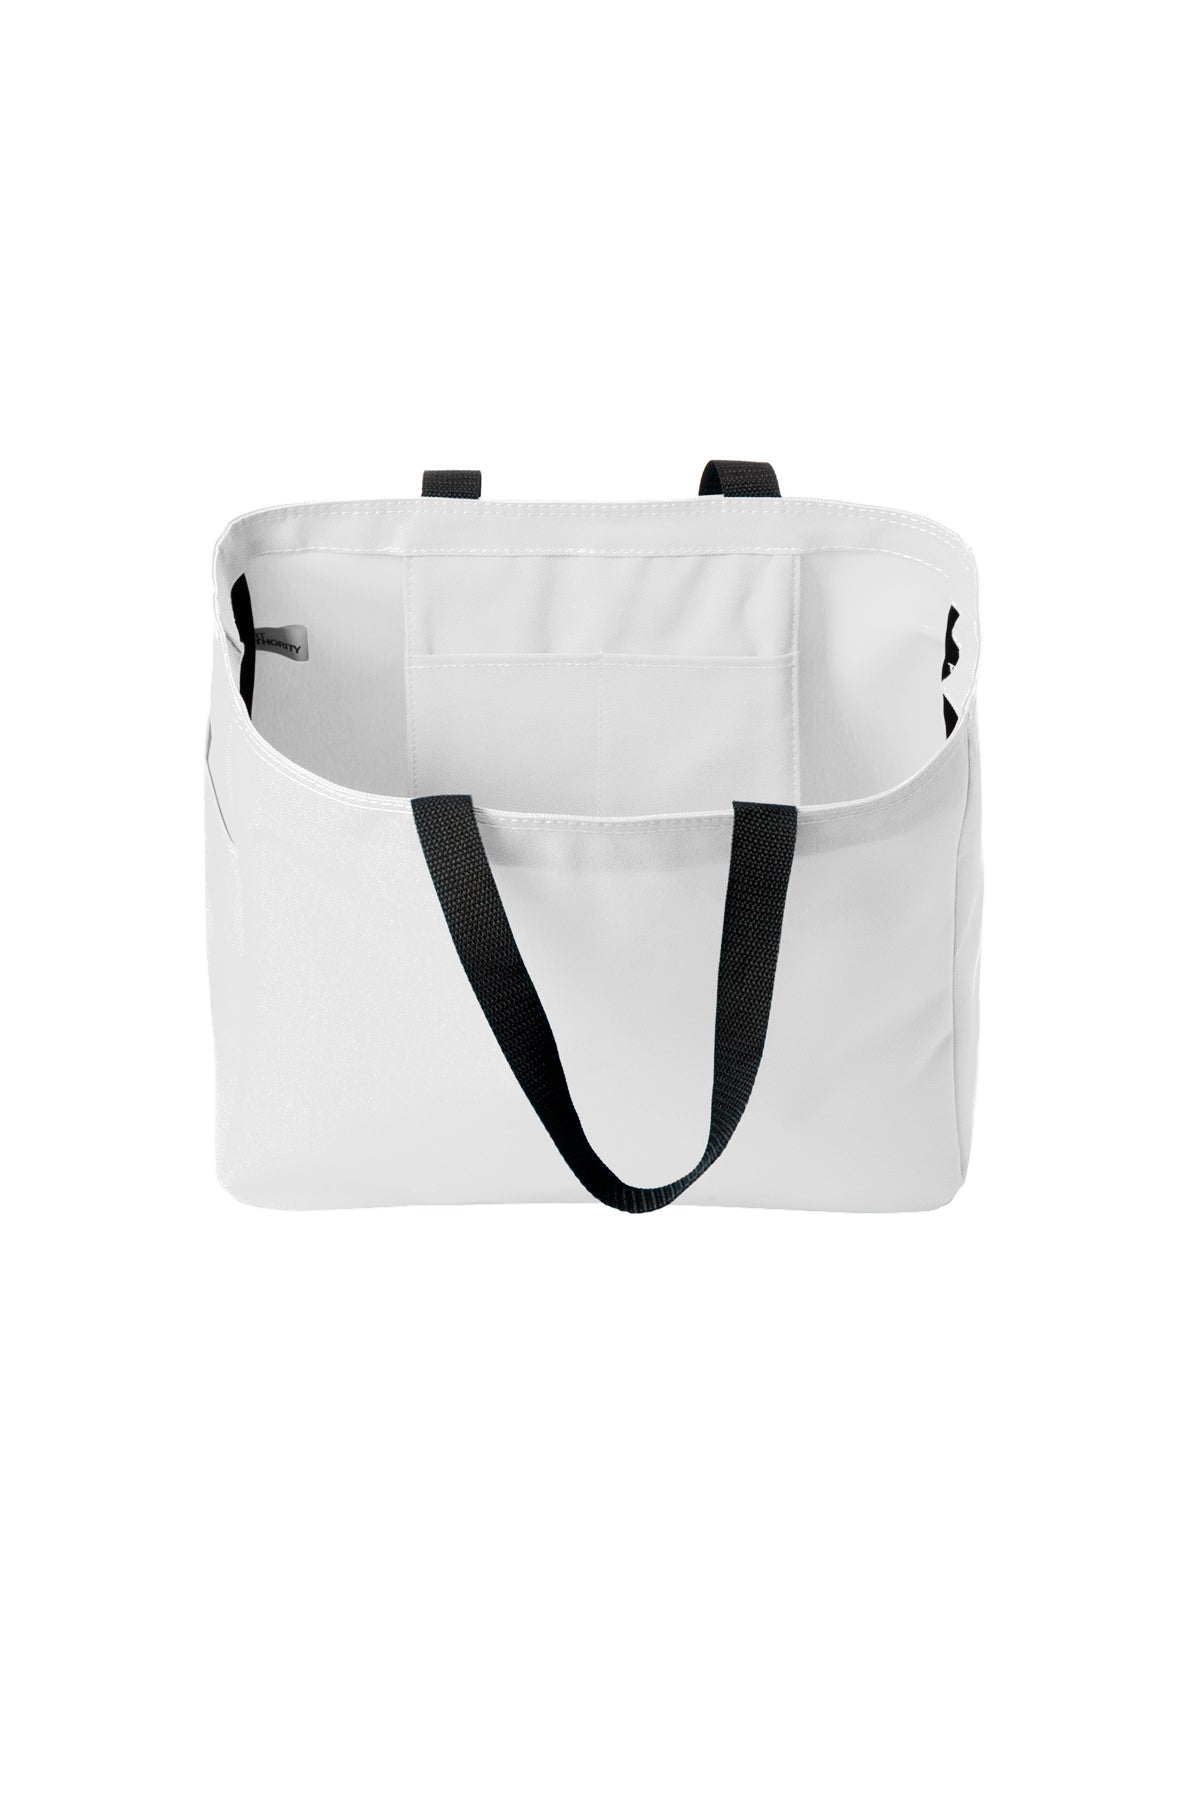 Port Authority - Essential Customized Tote, White